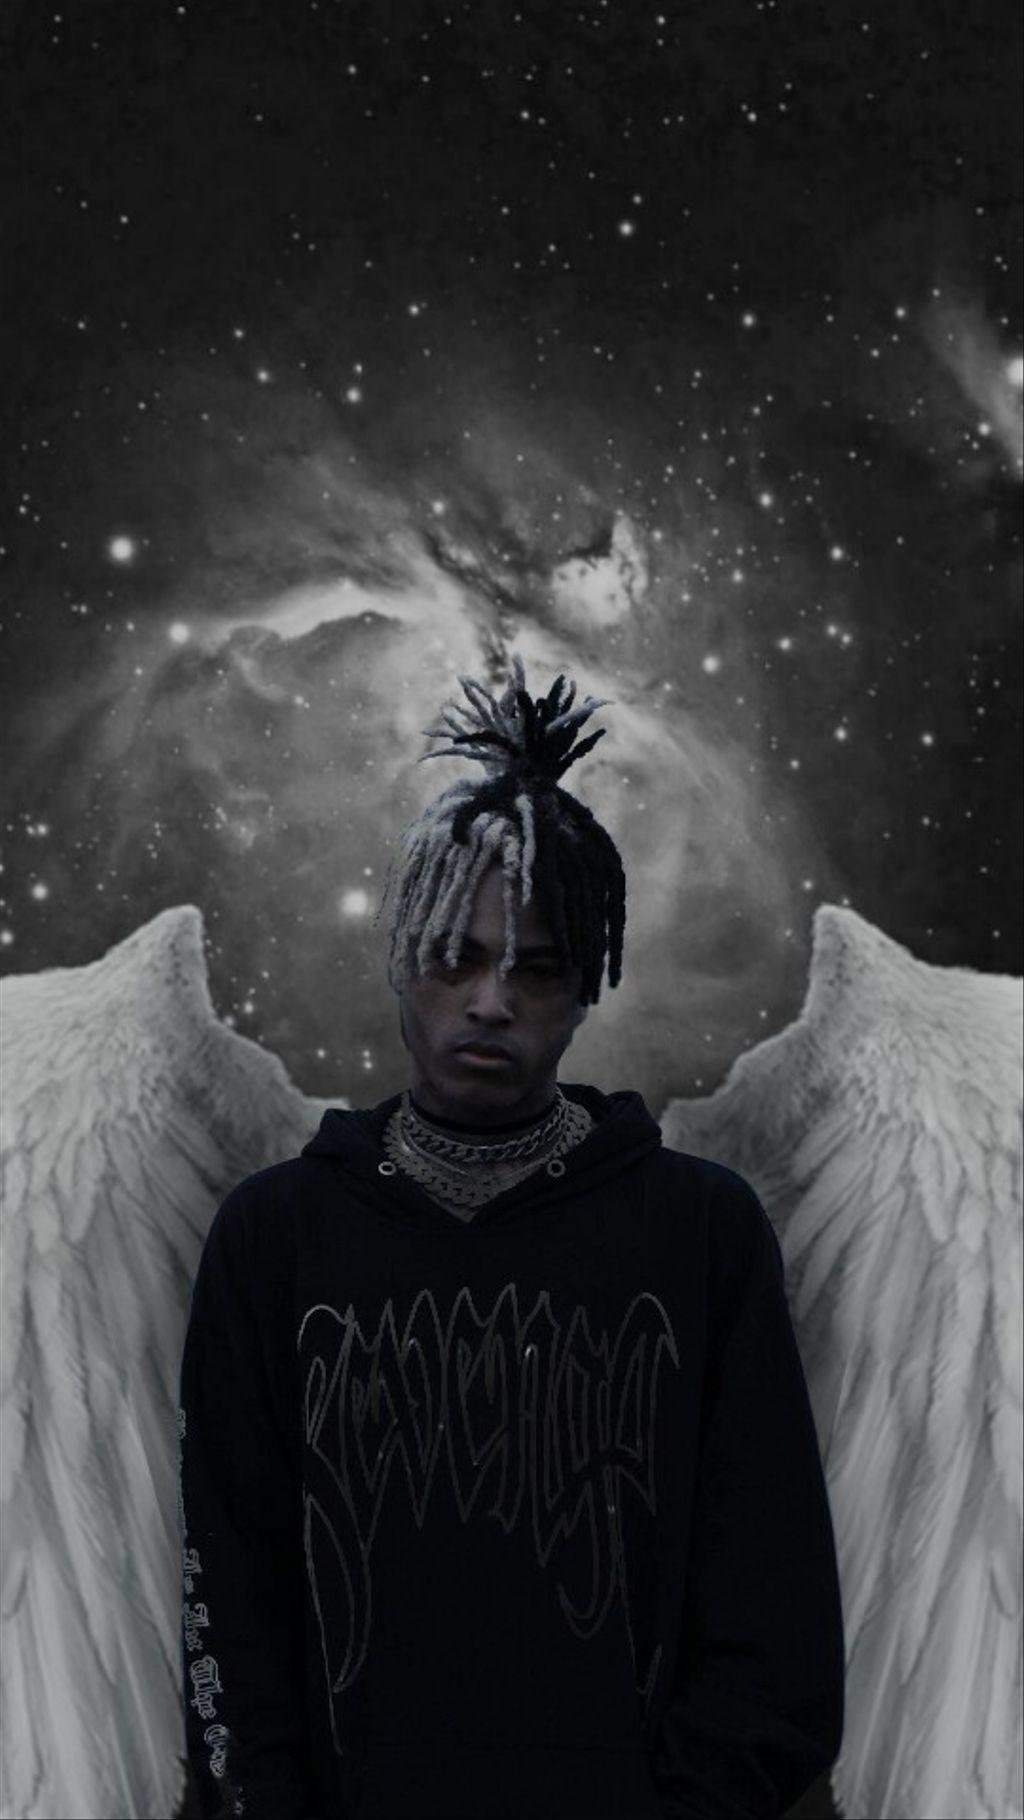 Custom XxxTentacion and Juice WRLD Wallpapers Made for Cute Prince   Editing  Designing Amino